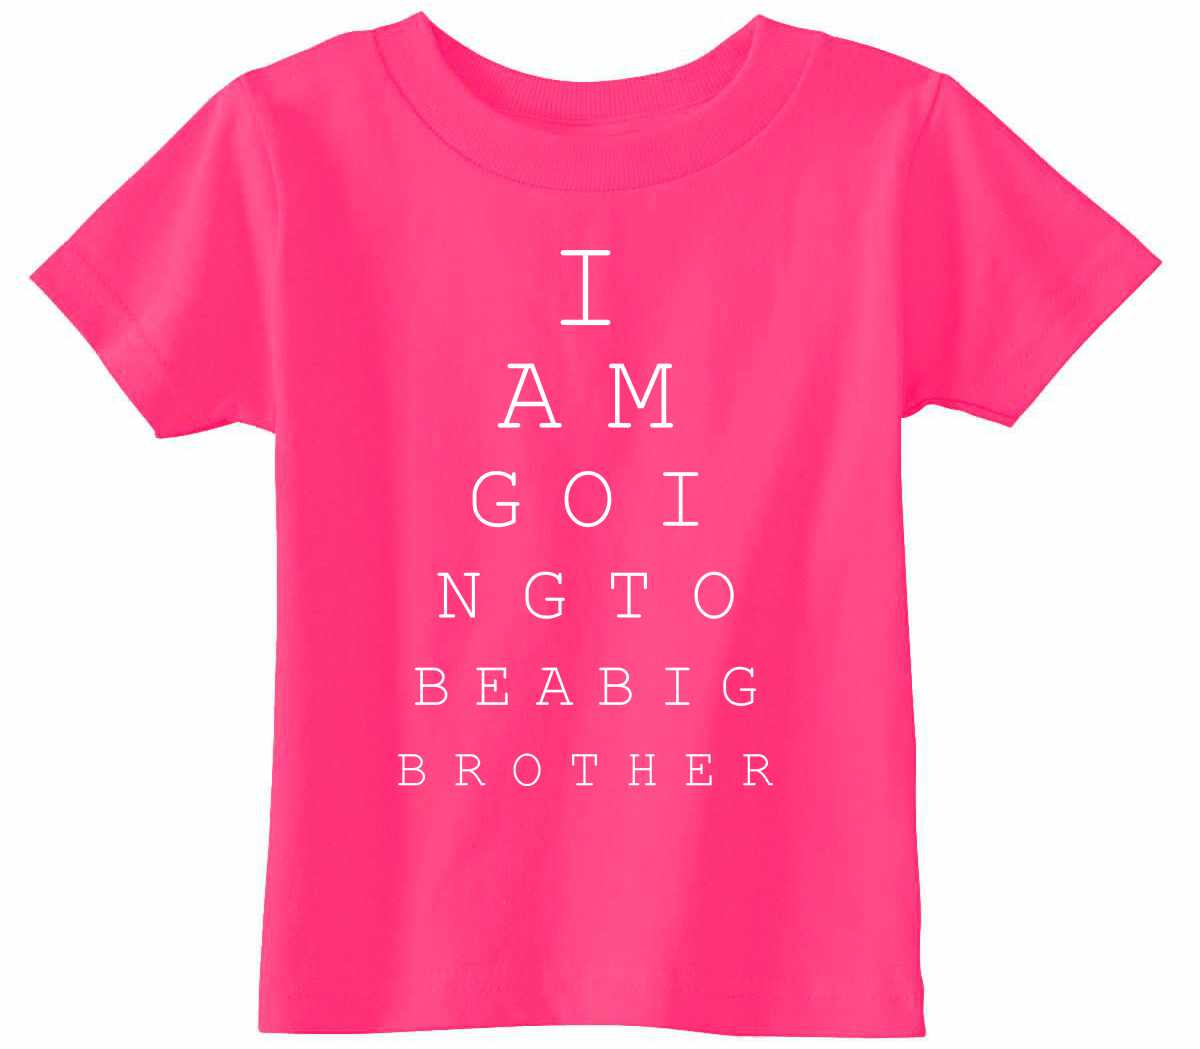 I AM GOING TO BE BIG BROTHER EYE CHART Infant/Toddler  (#1008-7)